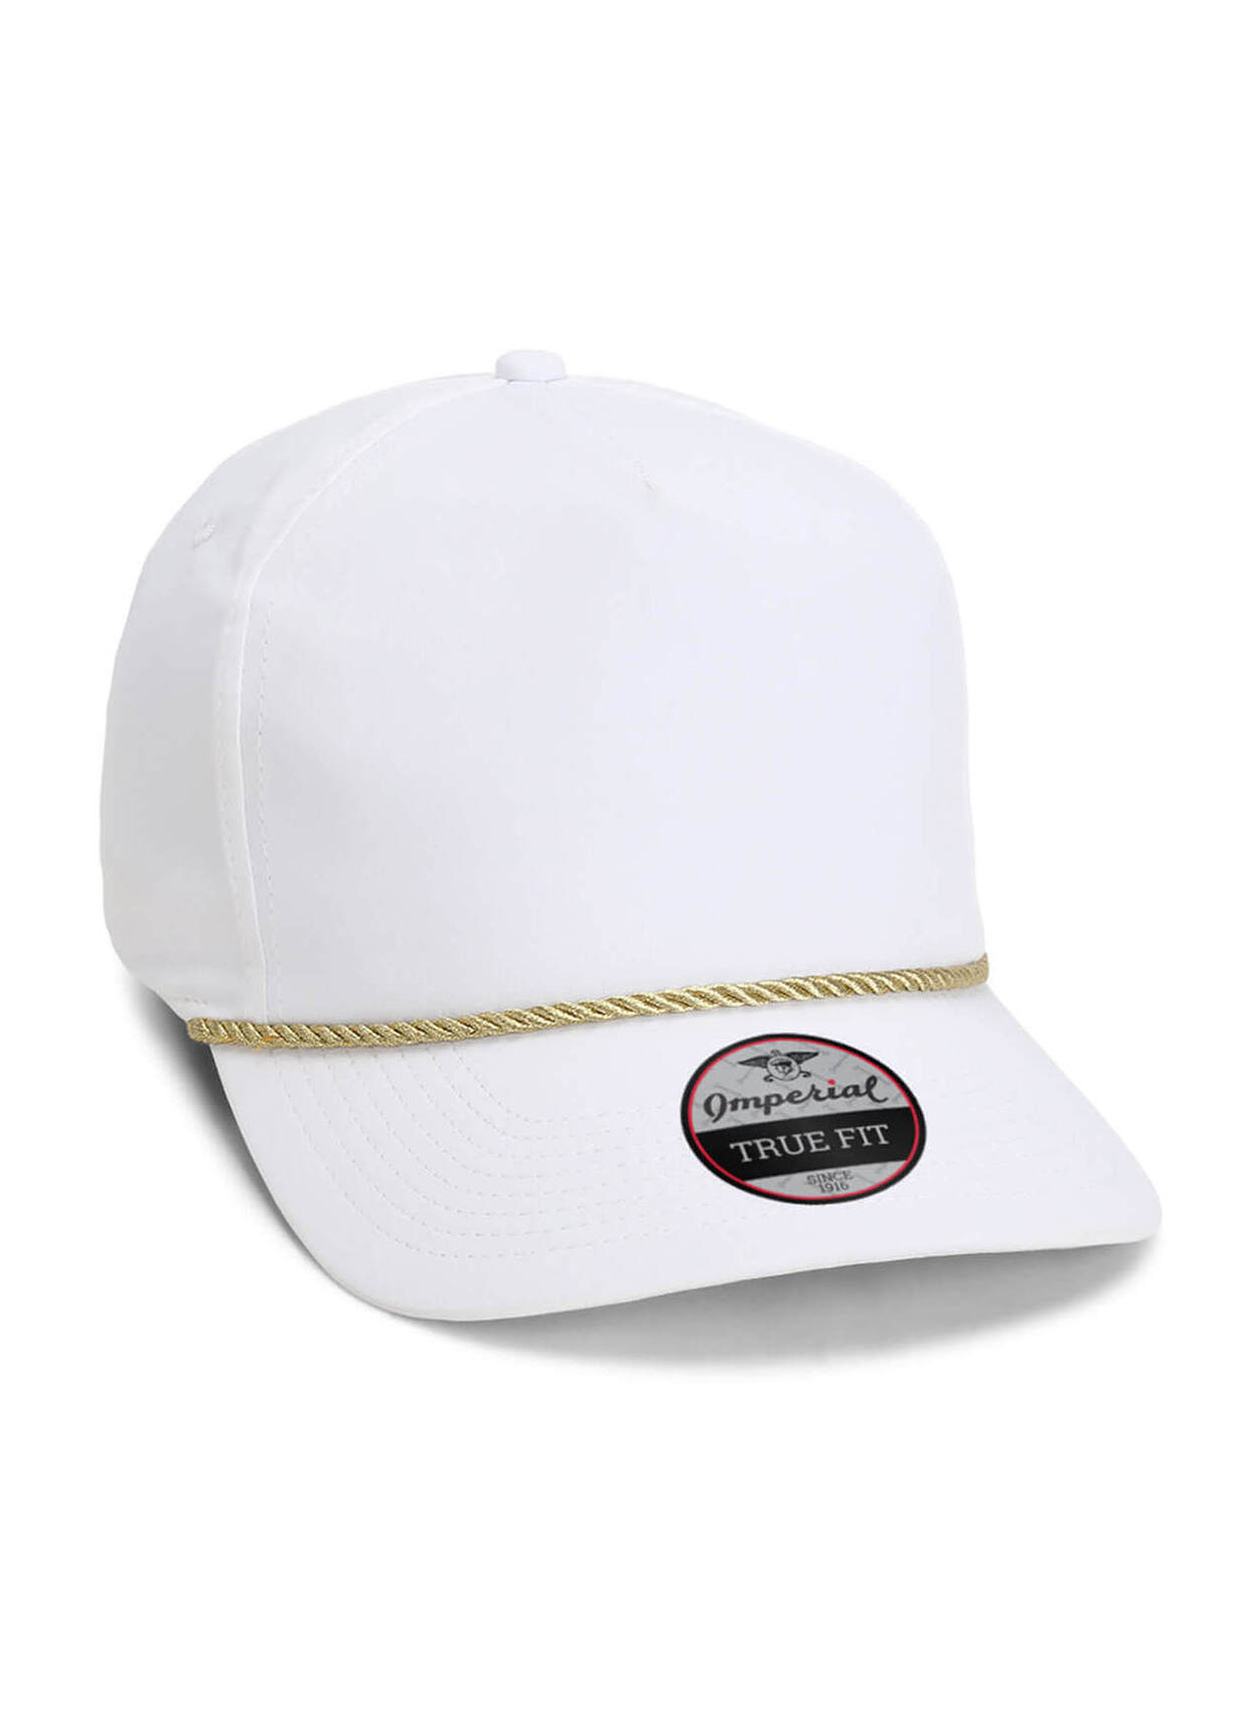 Imperial White / Gold The Wrightson Performance Rope Hat